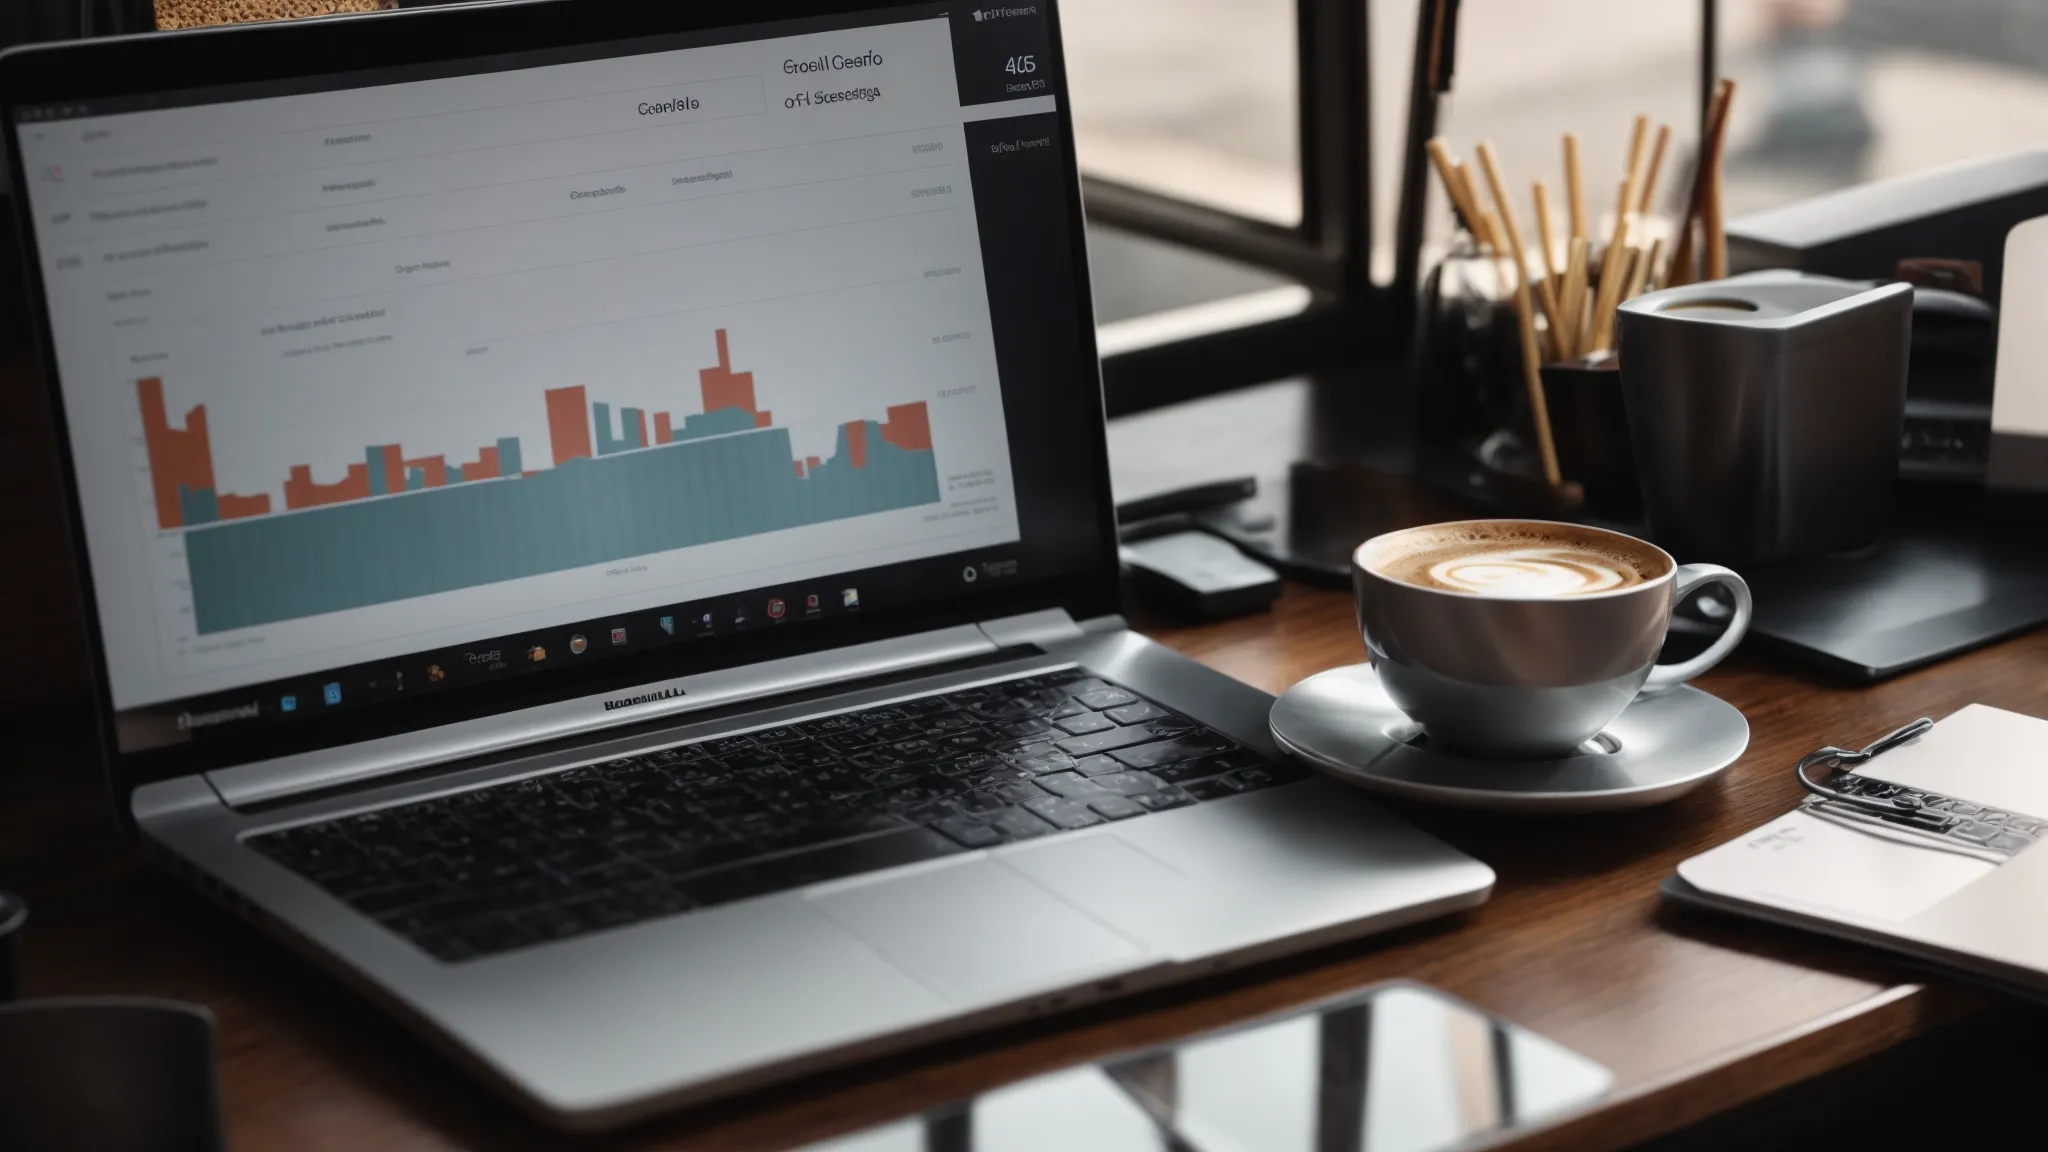 a close-up of a laptop showing a dashboard with seo analytics on the screen, surrounded by marketing strategy reports and a cup of coffee on the desk.